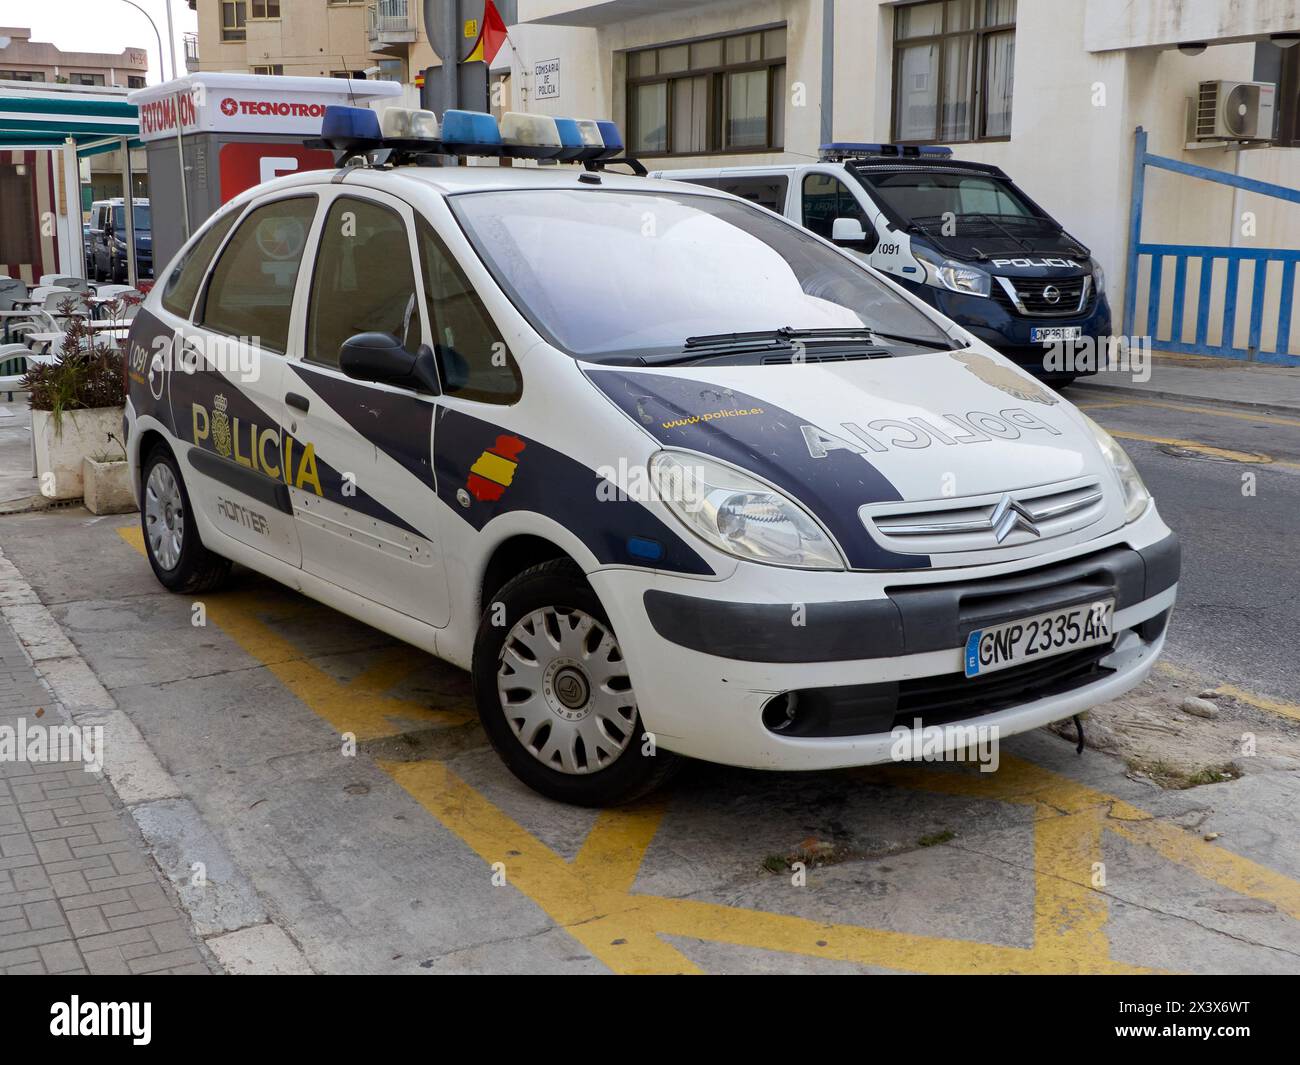 Torremolinos, Spain: Old police car Citroën Xsara Picasso of the national police, parked near the police station. Stock Photo